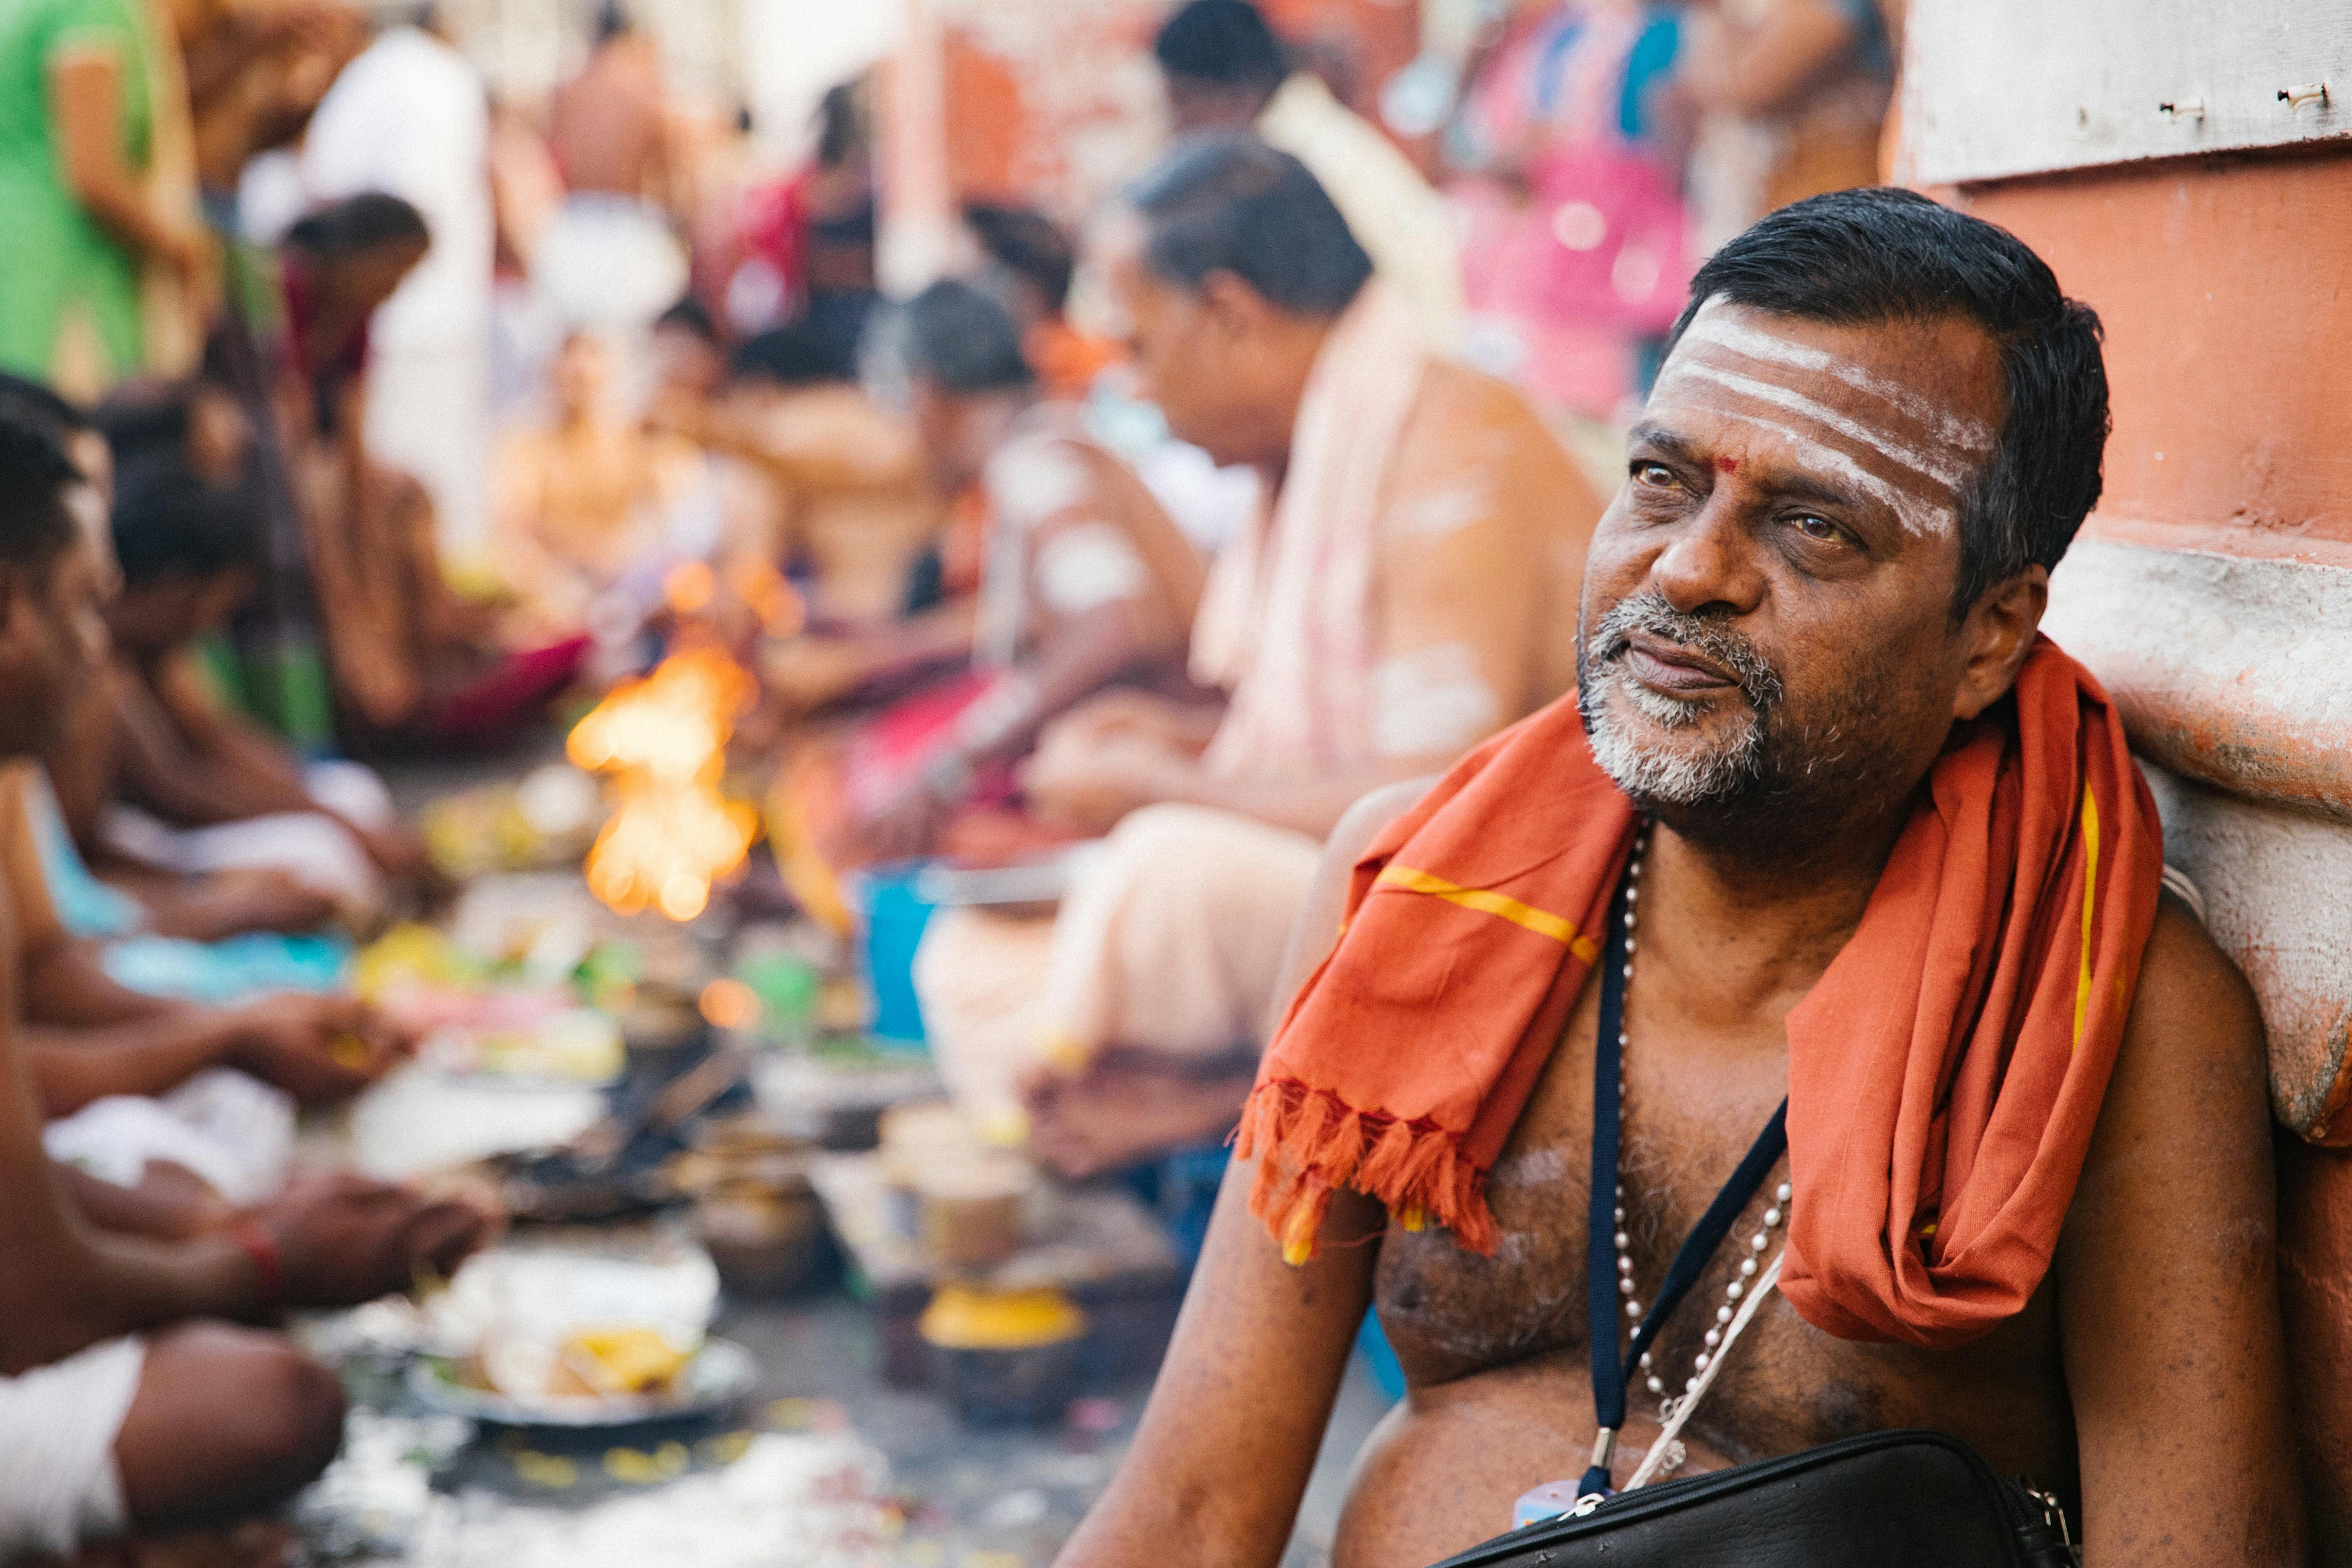 Pandits preserve the soul of Hindu society and culture, yet their role goes unnoticed